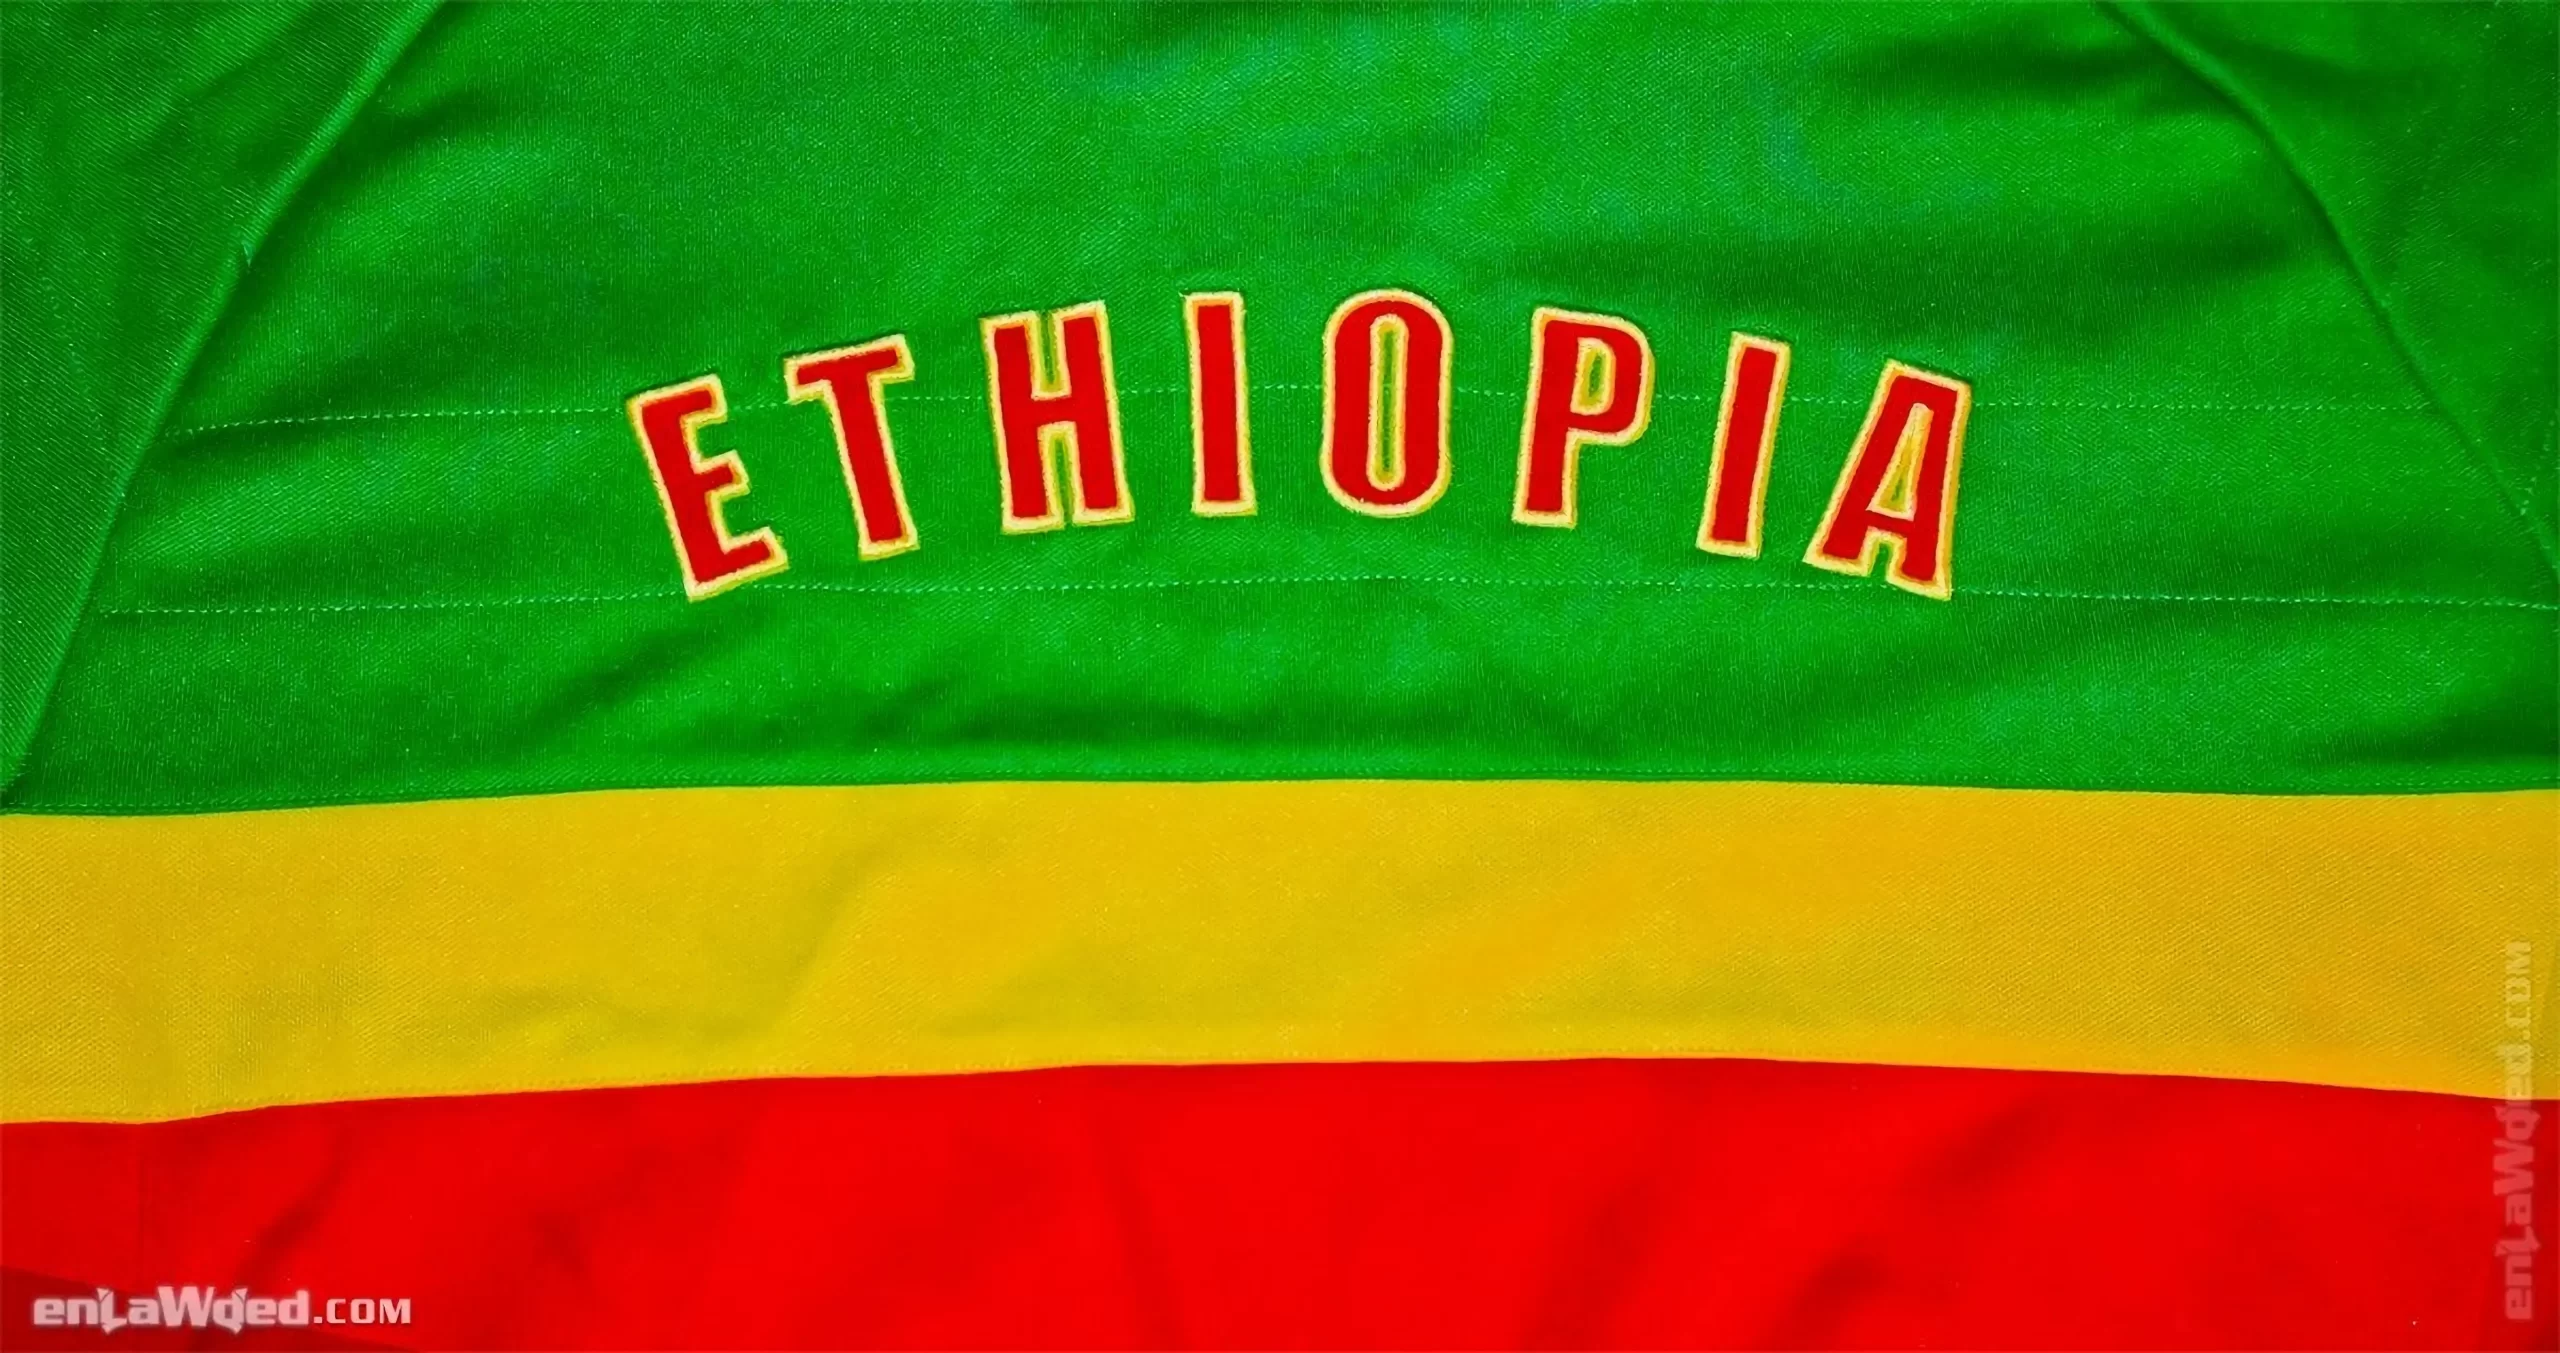 Back face view of the Ethiopian jacket with ETHIOPIA written in big red letters with yellow borders over the green part